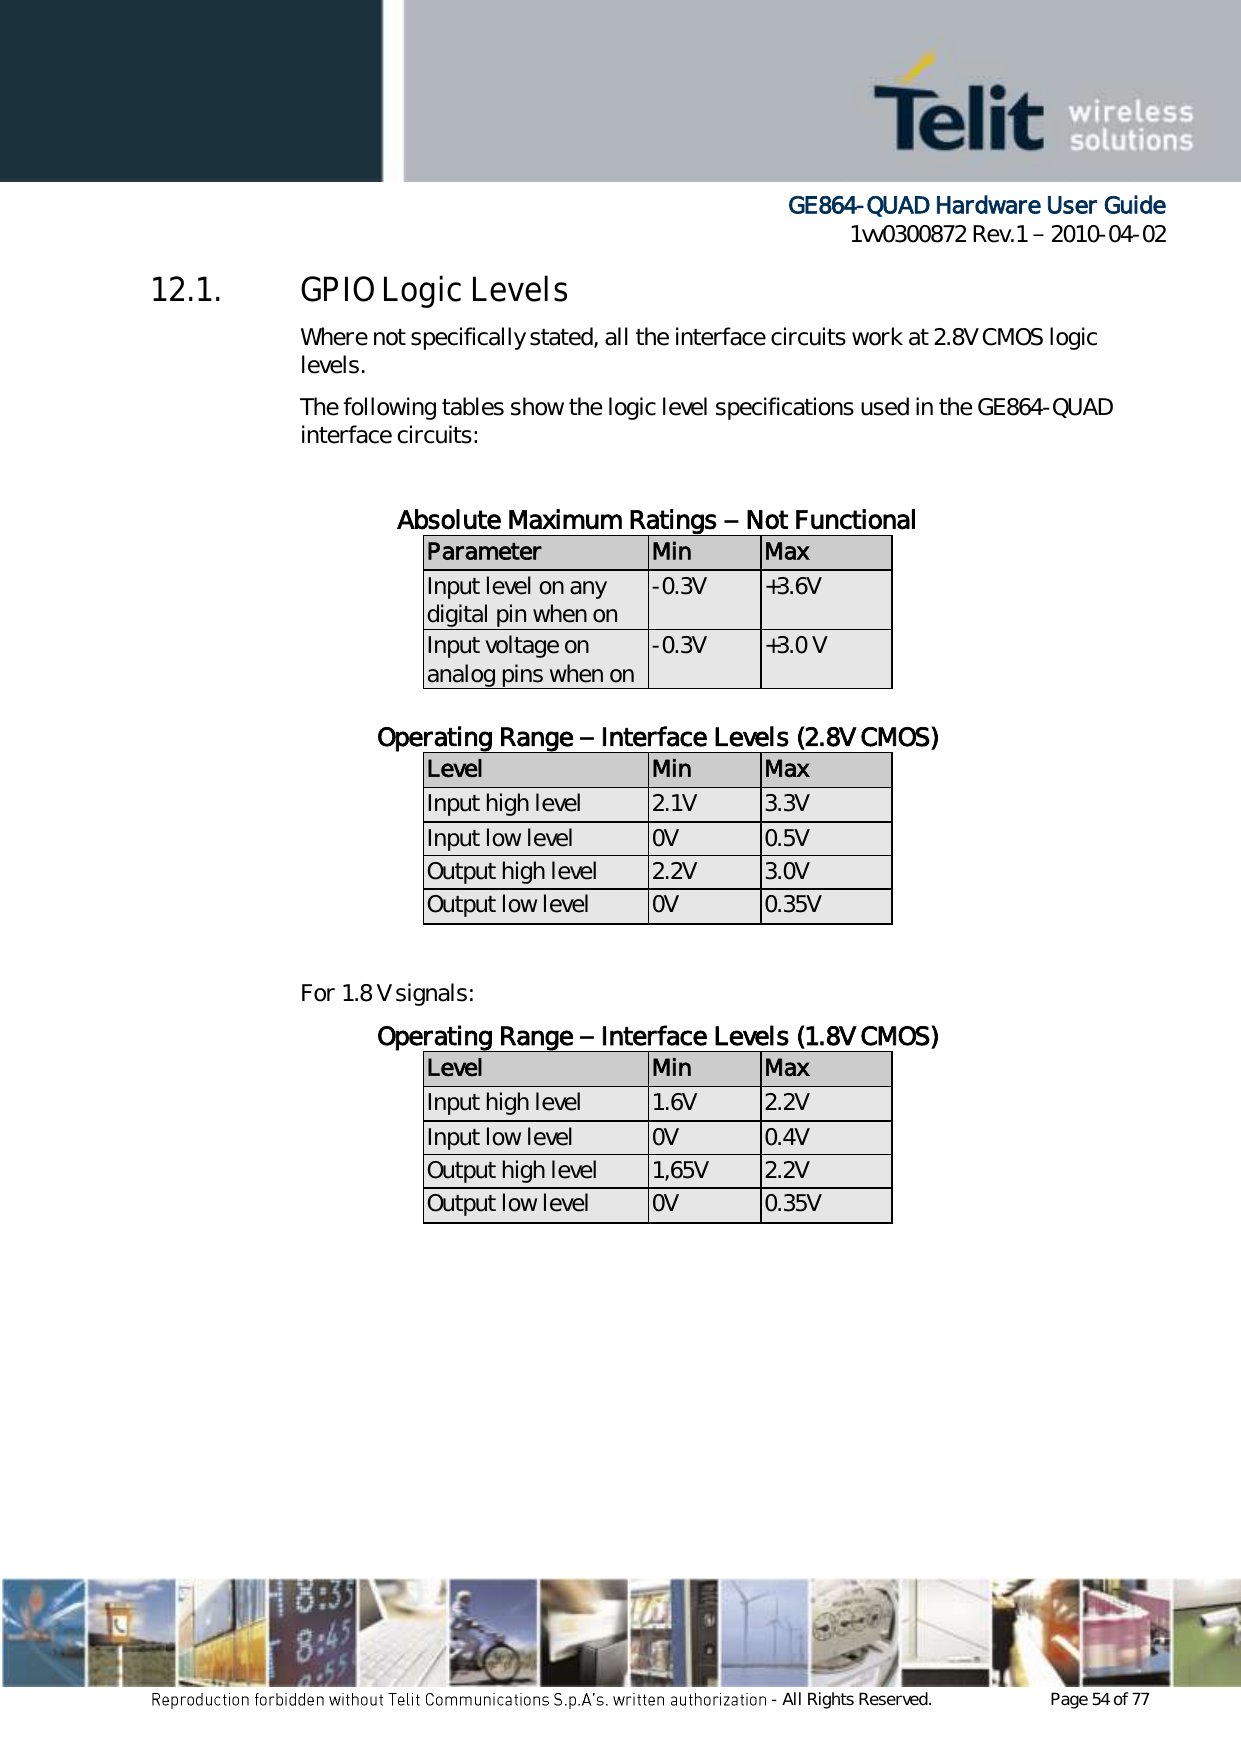      GE864-QUAD Hardware User Guide 1vv0300872 Rev.1   2010-04-02 - All Rights Reserved.    Page 54 of 77  12.1. GPIO Logic Levels Where not specifically stated, all the interface circuits work at 2.8V CMOS logic levels. The following tables show the logic level specifications used in the GE864-QUAD interface circuits:  Absolute Maximum Ratings – Not Functional Parameter Min Max Input level on any digital pin when on -0.3V +3.6V Input voltage on analog pins when on -0.3V +3.0 V  Operating Range – Interface Levels (2.8V CMOS) Level Min Max Input high level 2.1V 3.3V Input low level 0V 0.5V Output high level 2.2V 3.0V Output low level 0V 0.35V  For 1.8 V signals: Operating Range – Interface Levels (1.8V CMOS) Level Min Max Input high level 1.6V 2.2V Input low level 0V 0.4V Output high level 1,65V 2.2V Output low level 0V 0.35V  